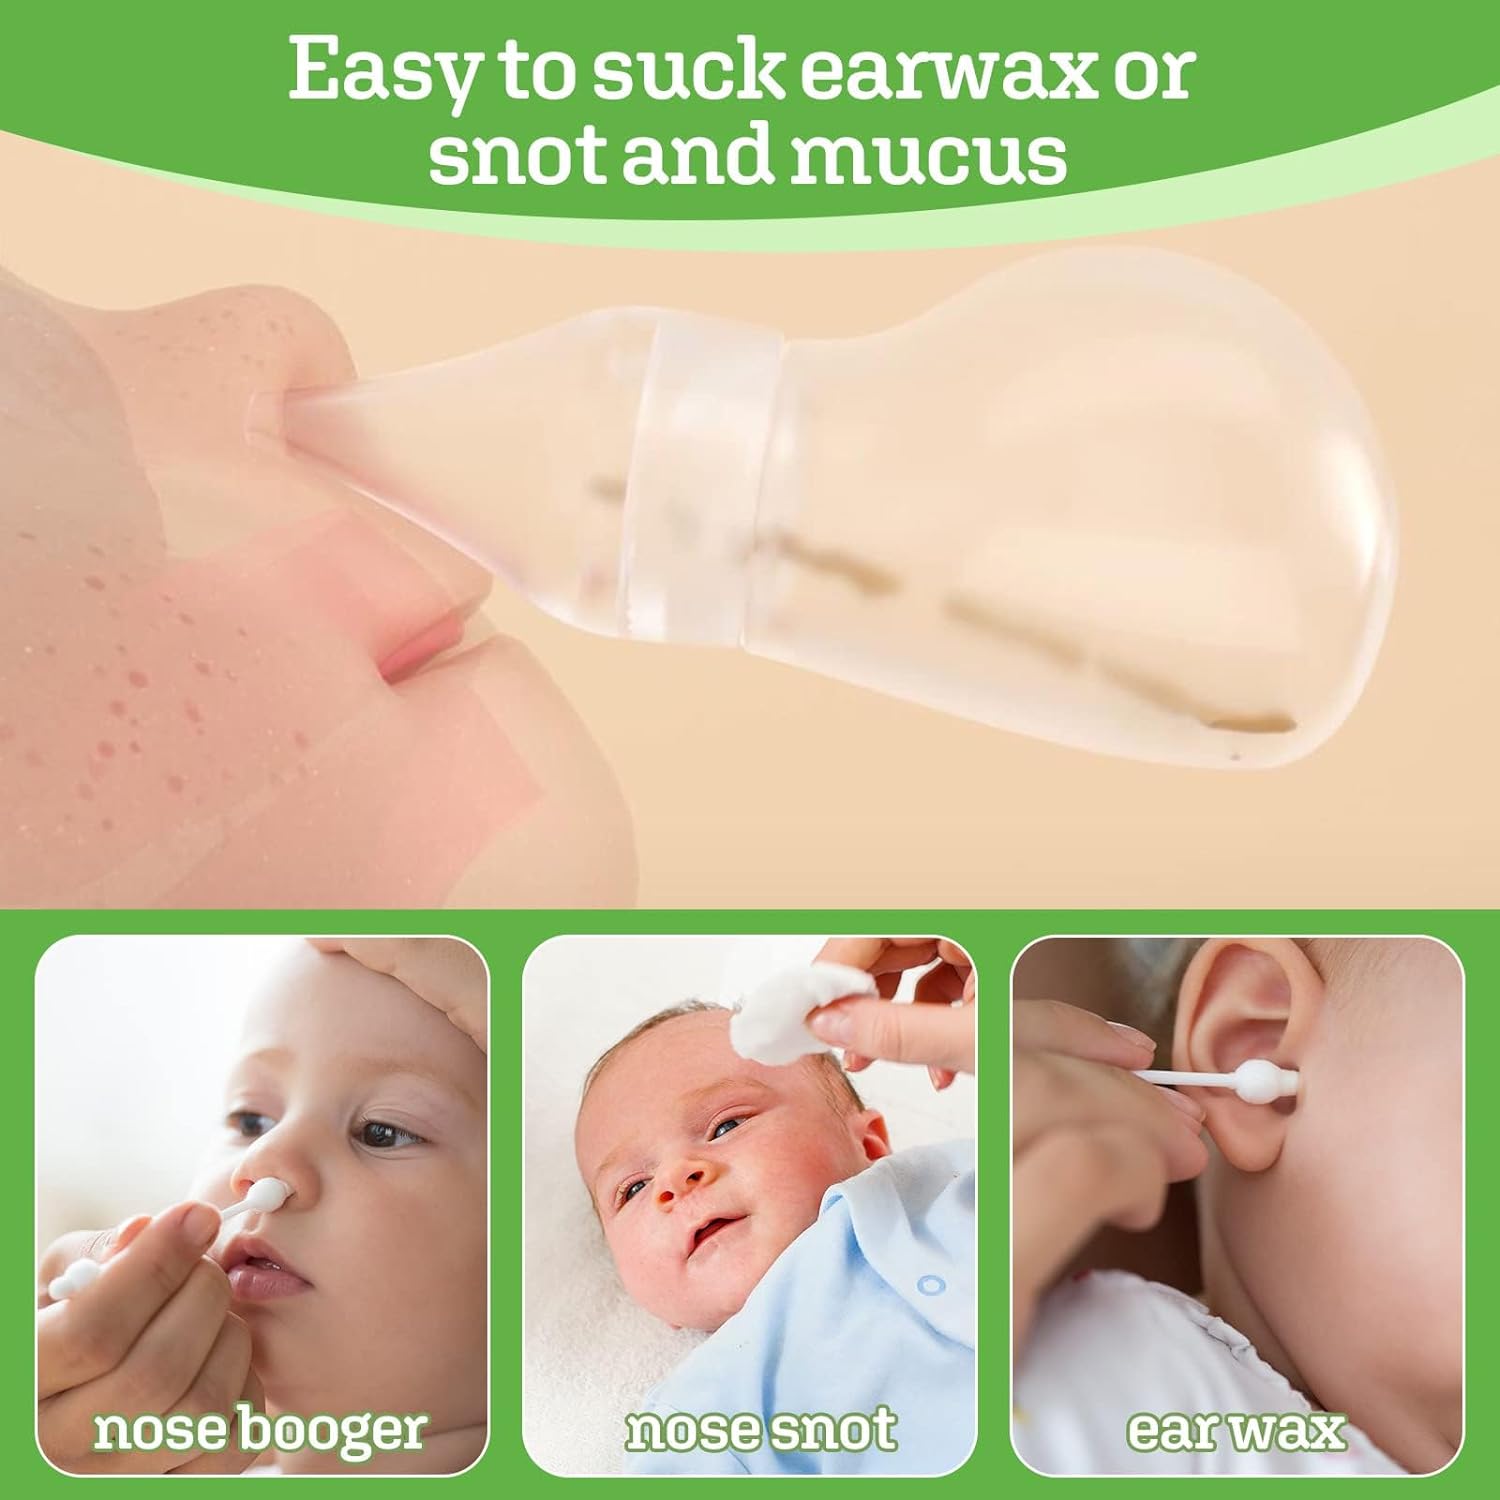 Haakaa Silicone Baby Nasal Aspirator | Nose Bulb Syringe | Easy-Squeezy Baby Nose Cleaner, 0m+ Newborn Infant &Toddler - BPA Free Silicone : Baby